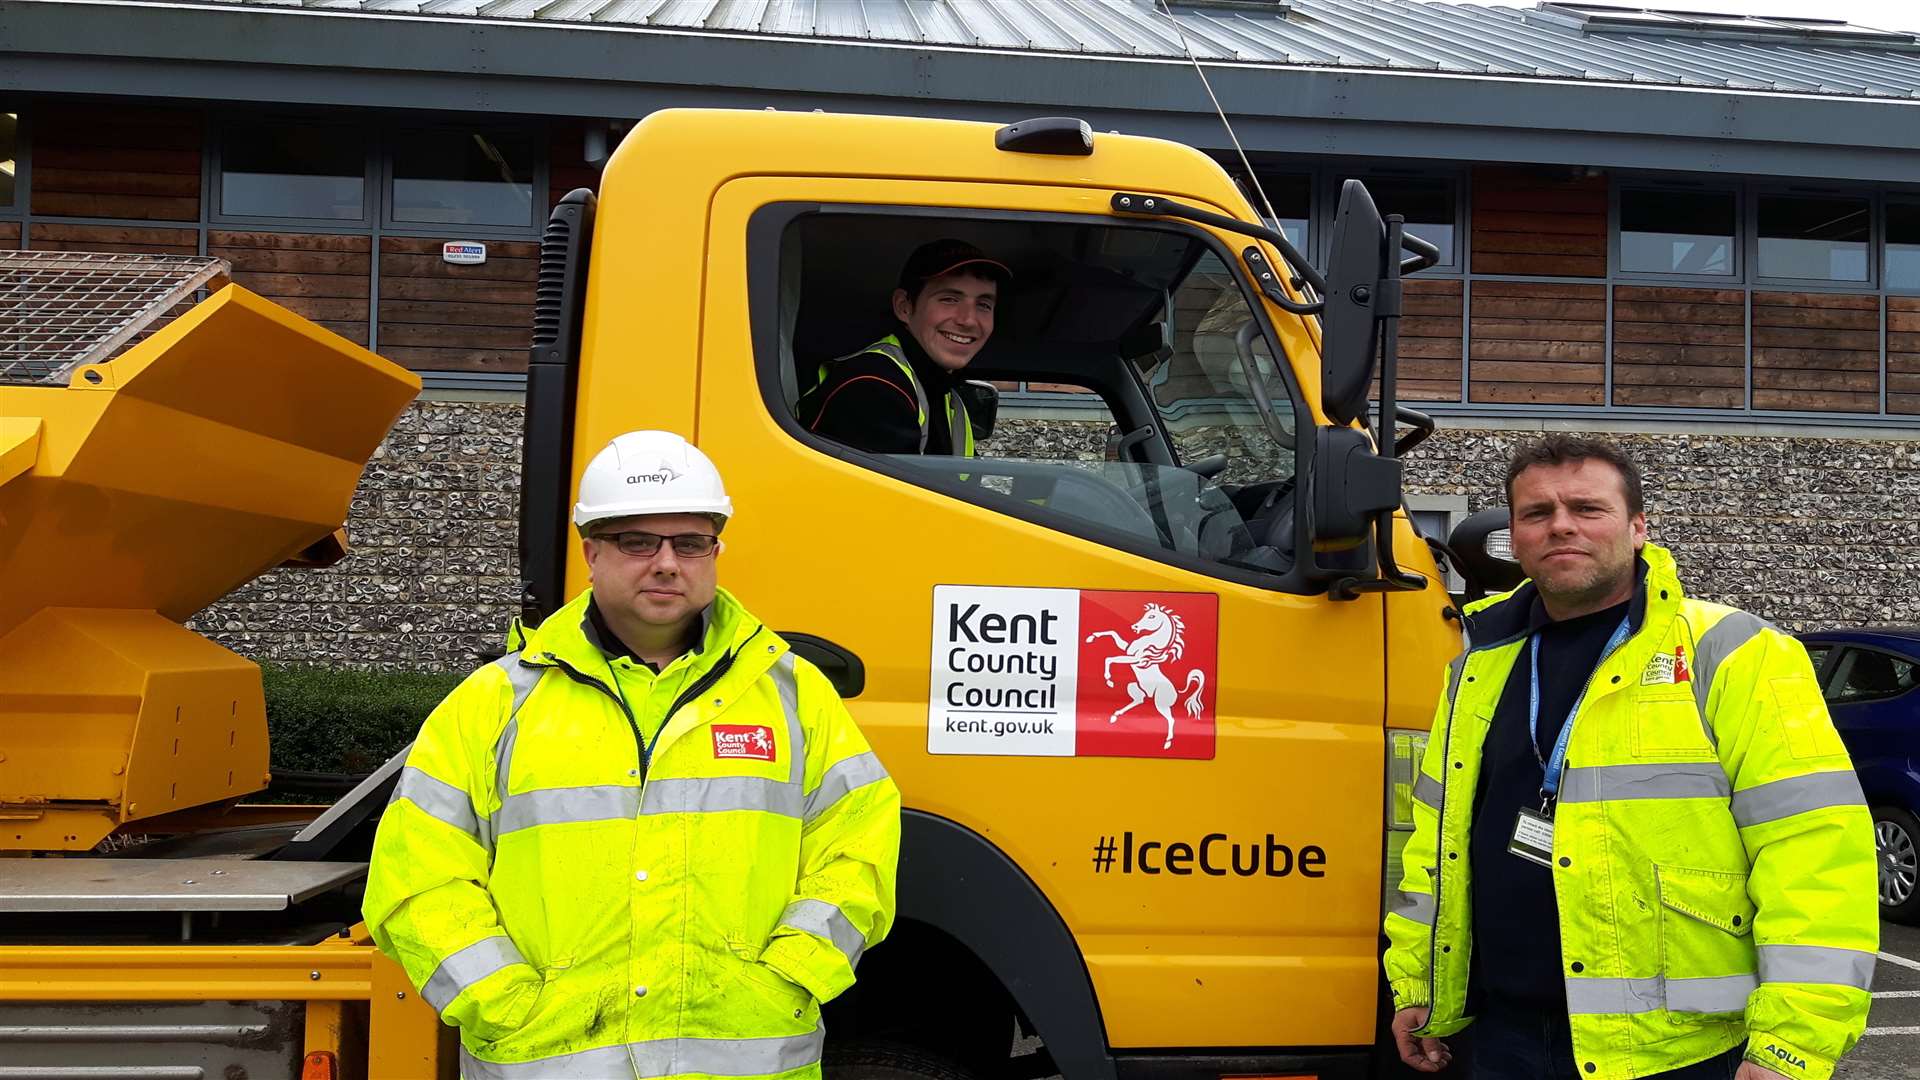 Andy Godden, pre-site technician for KCC, Paul Fagg and Clive Lofting, highway steward for Shepway